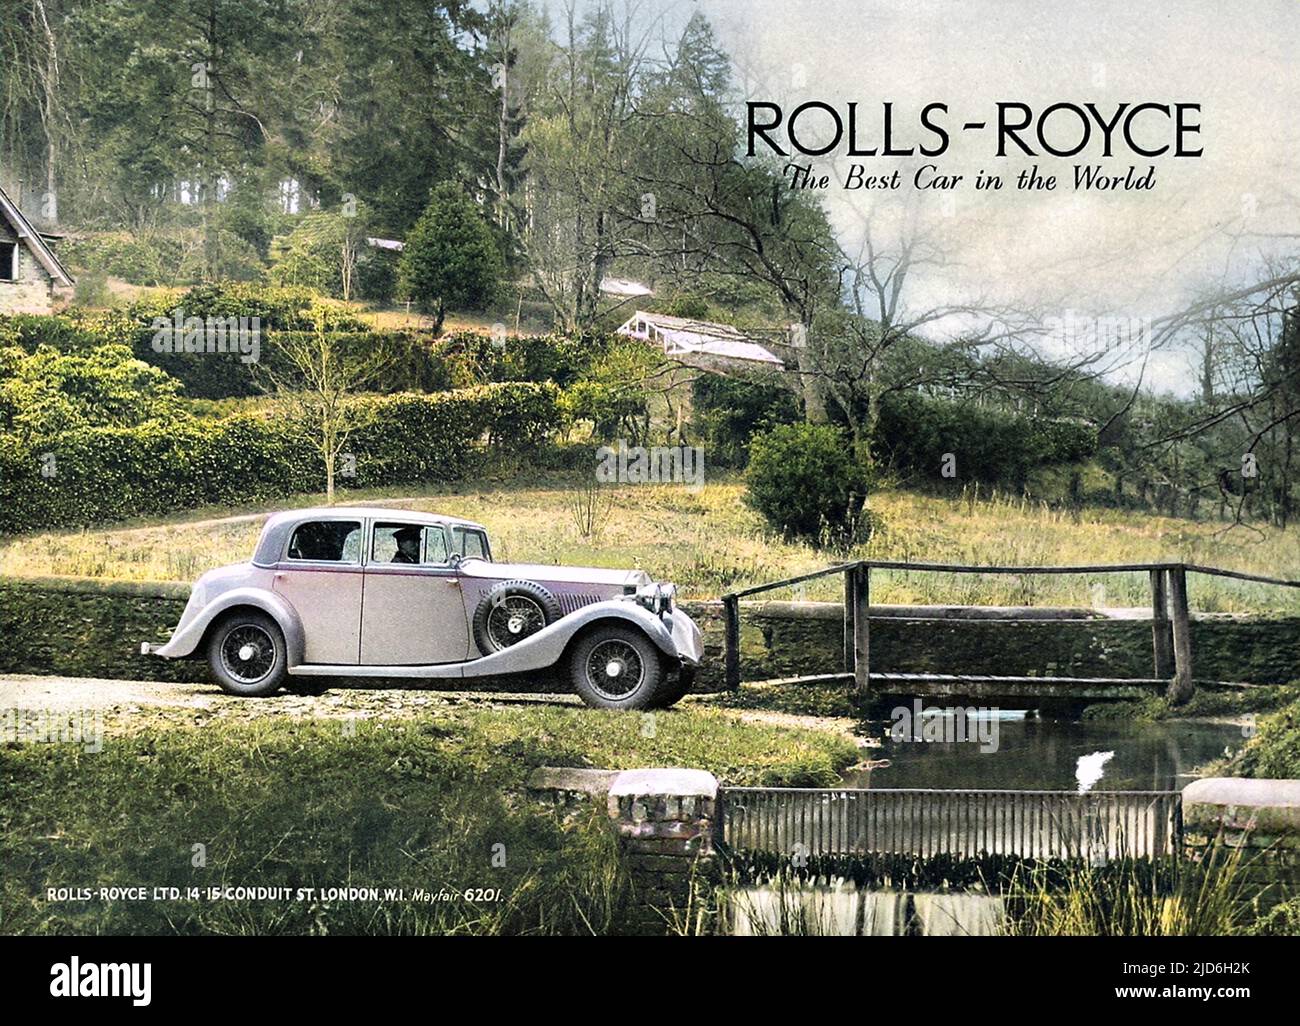 Advertisement for Rolls Royce cars 'the best car in the world'. Photograph of a Rolls Royce being driven by a chauffeur through a pretty rural scene. Colourised version of: 10216130       Date: 13th July 1935 Stock Photo